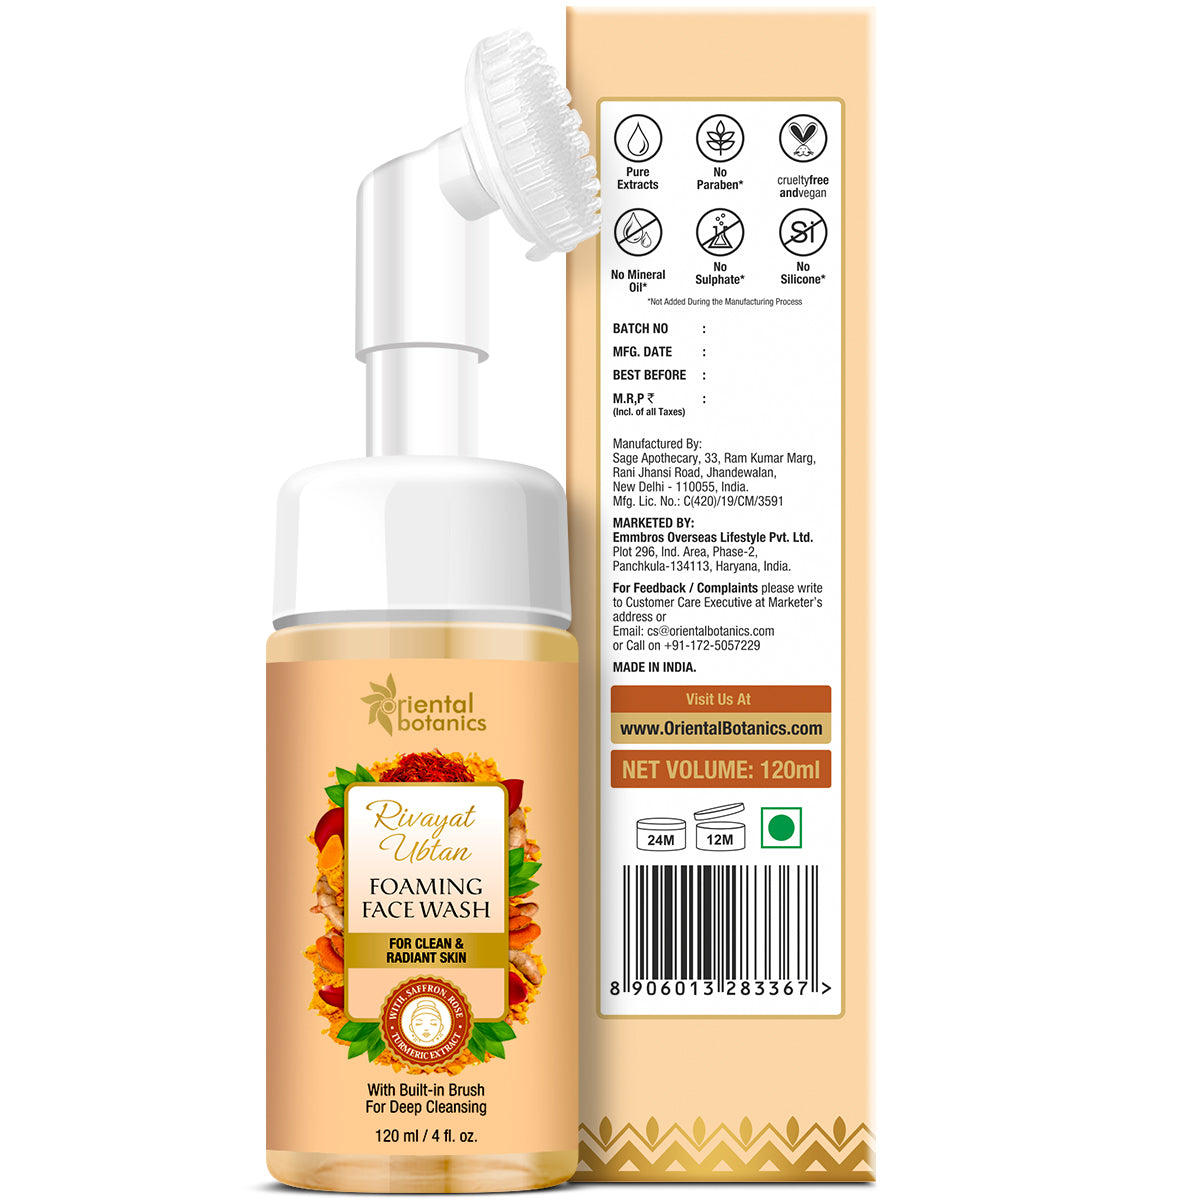 Oriental Botanics Rivayat Ubtan Foaming Face Wash With Built-In Brush, For Clear and Radiant Skin - With Saffron, Rose and Turmeric Extract, 120 ml